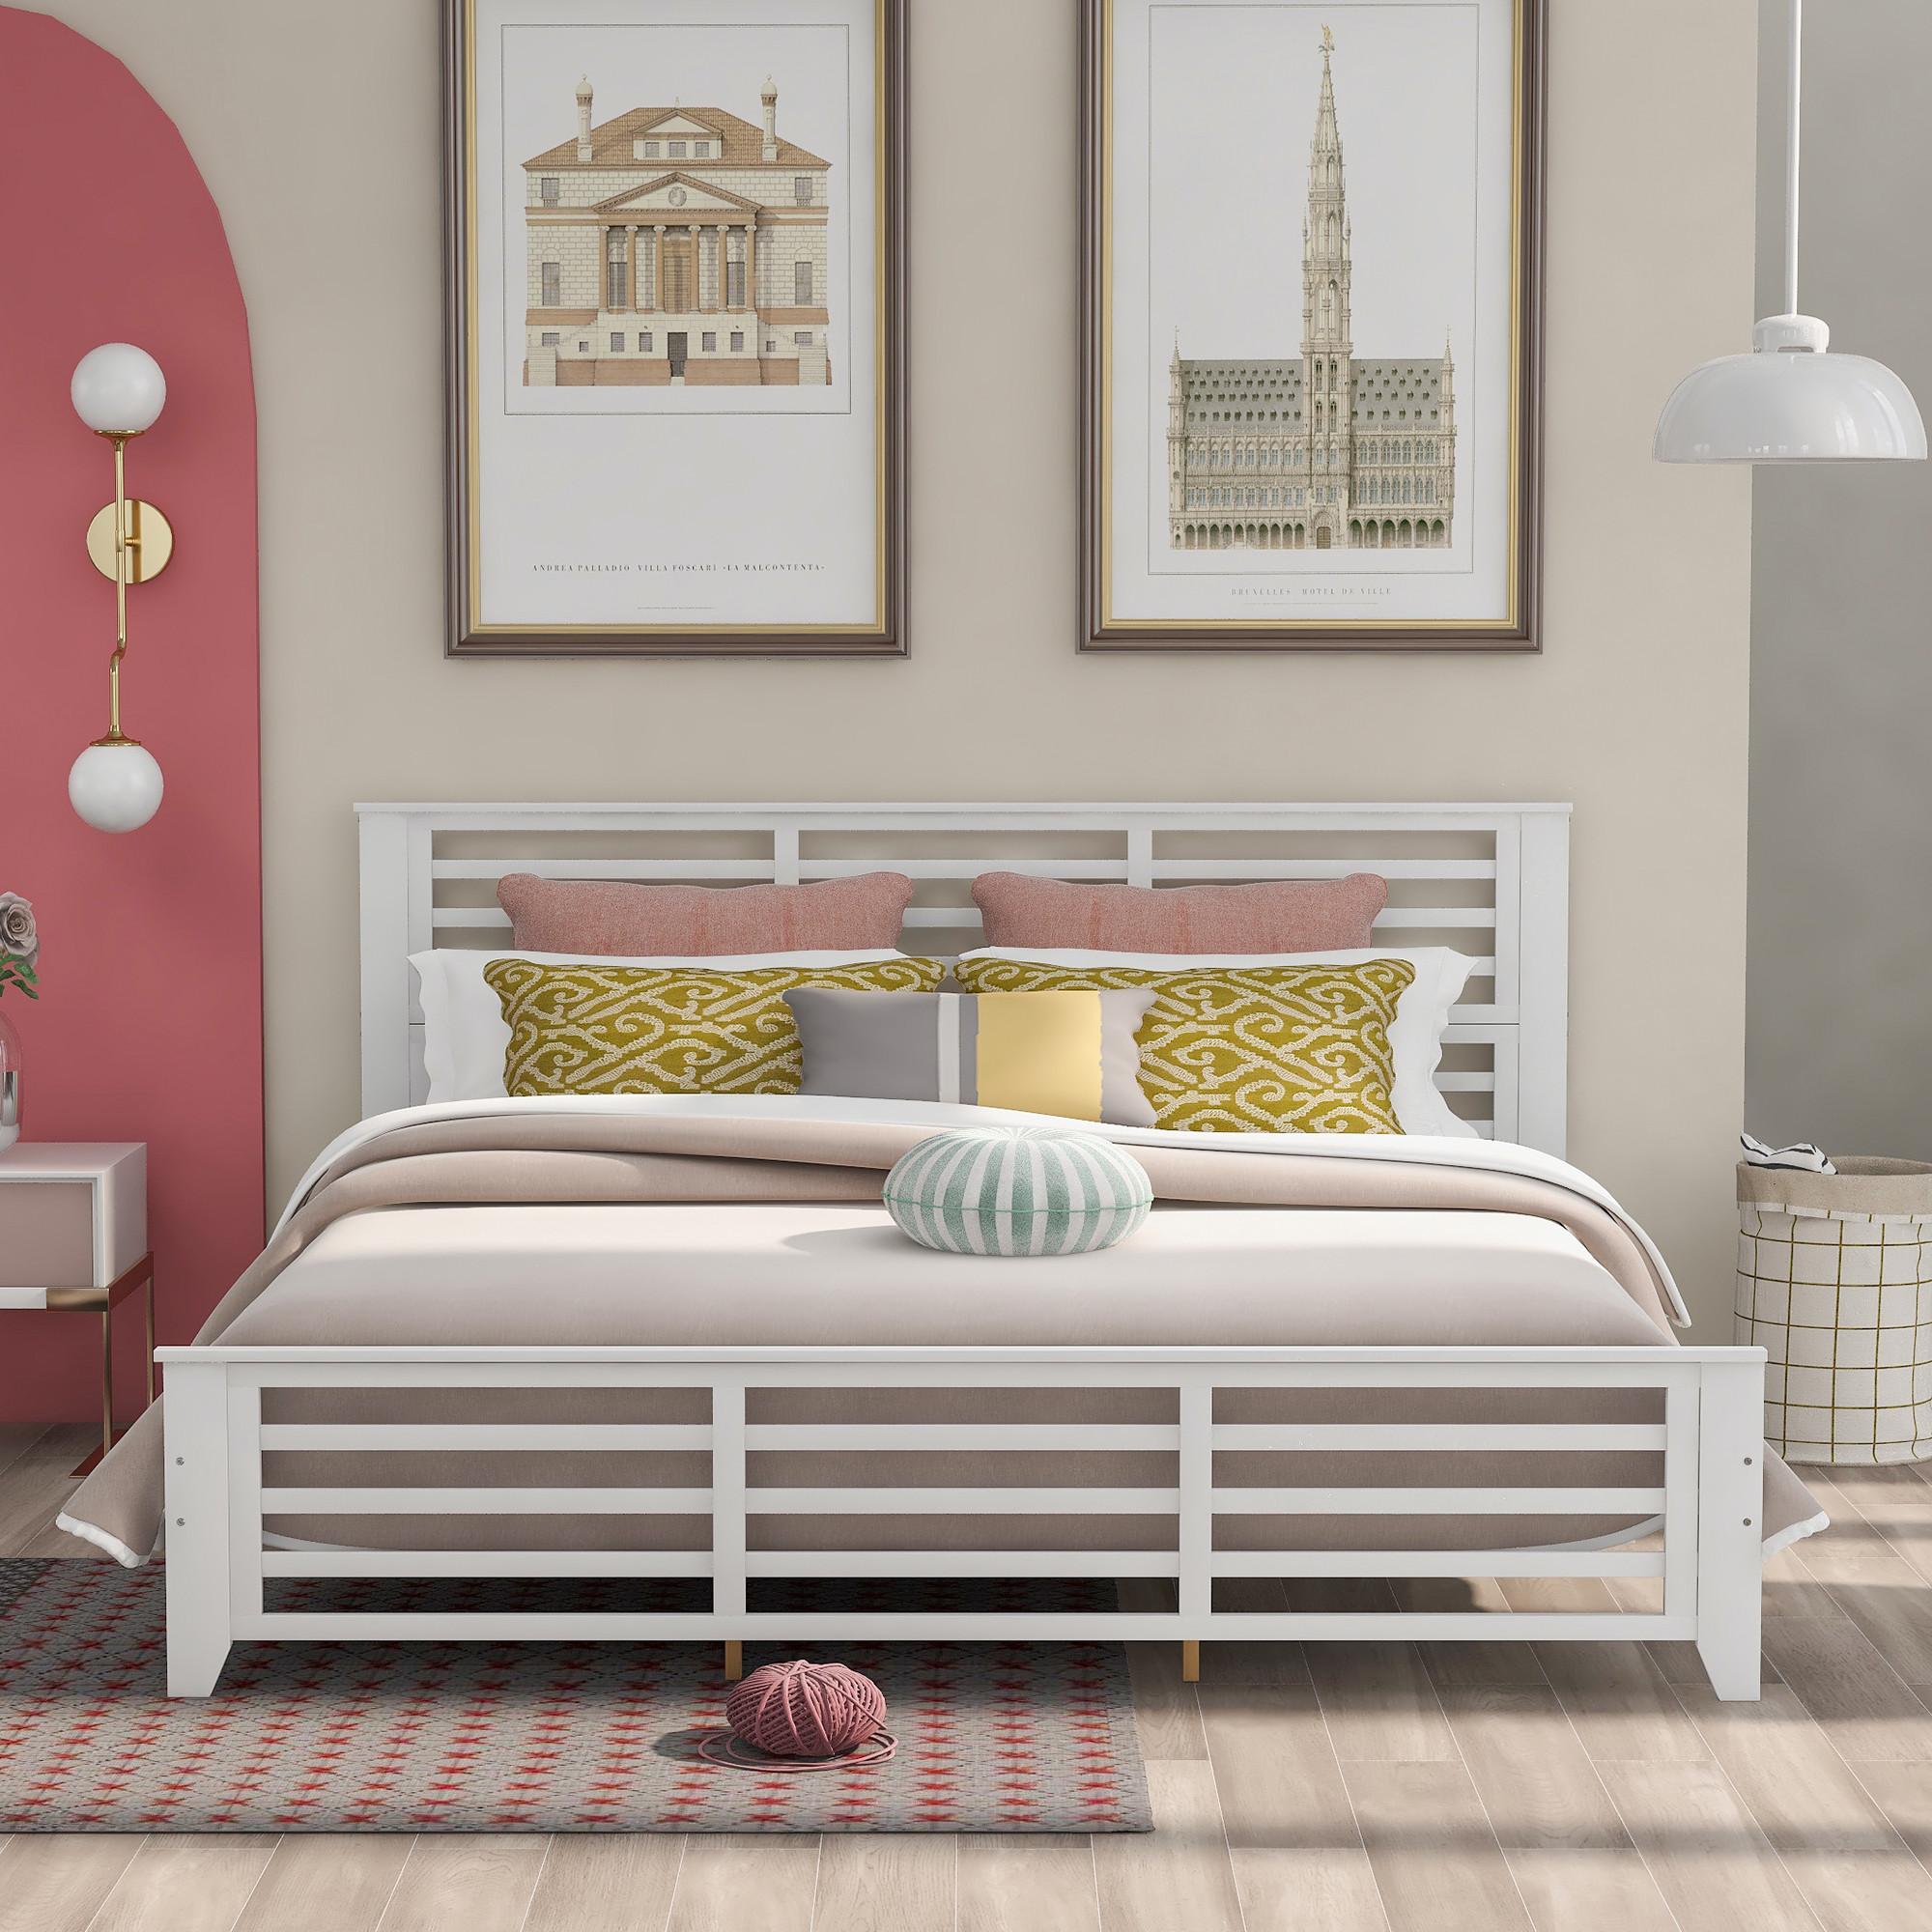 King Size Wood Platform Bed Frame with Headboard and Footboard, Solid Wood Foundation with Slat Support, White 79.9x80.7x41.3inch - image 3 of 7